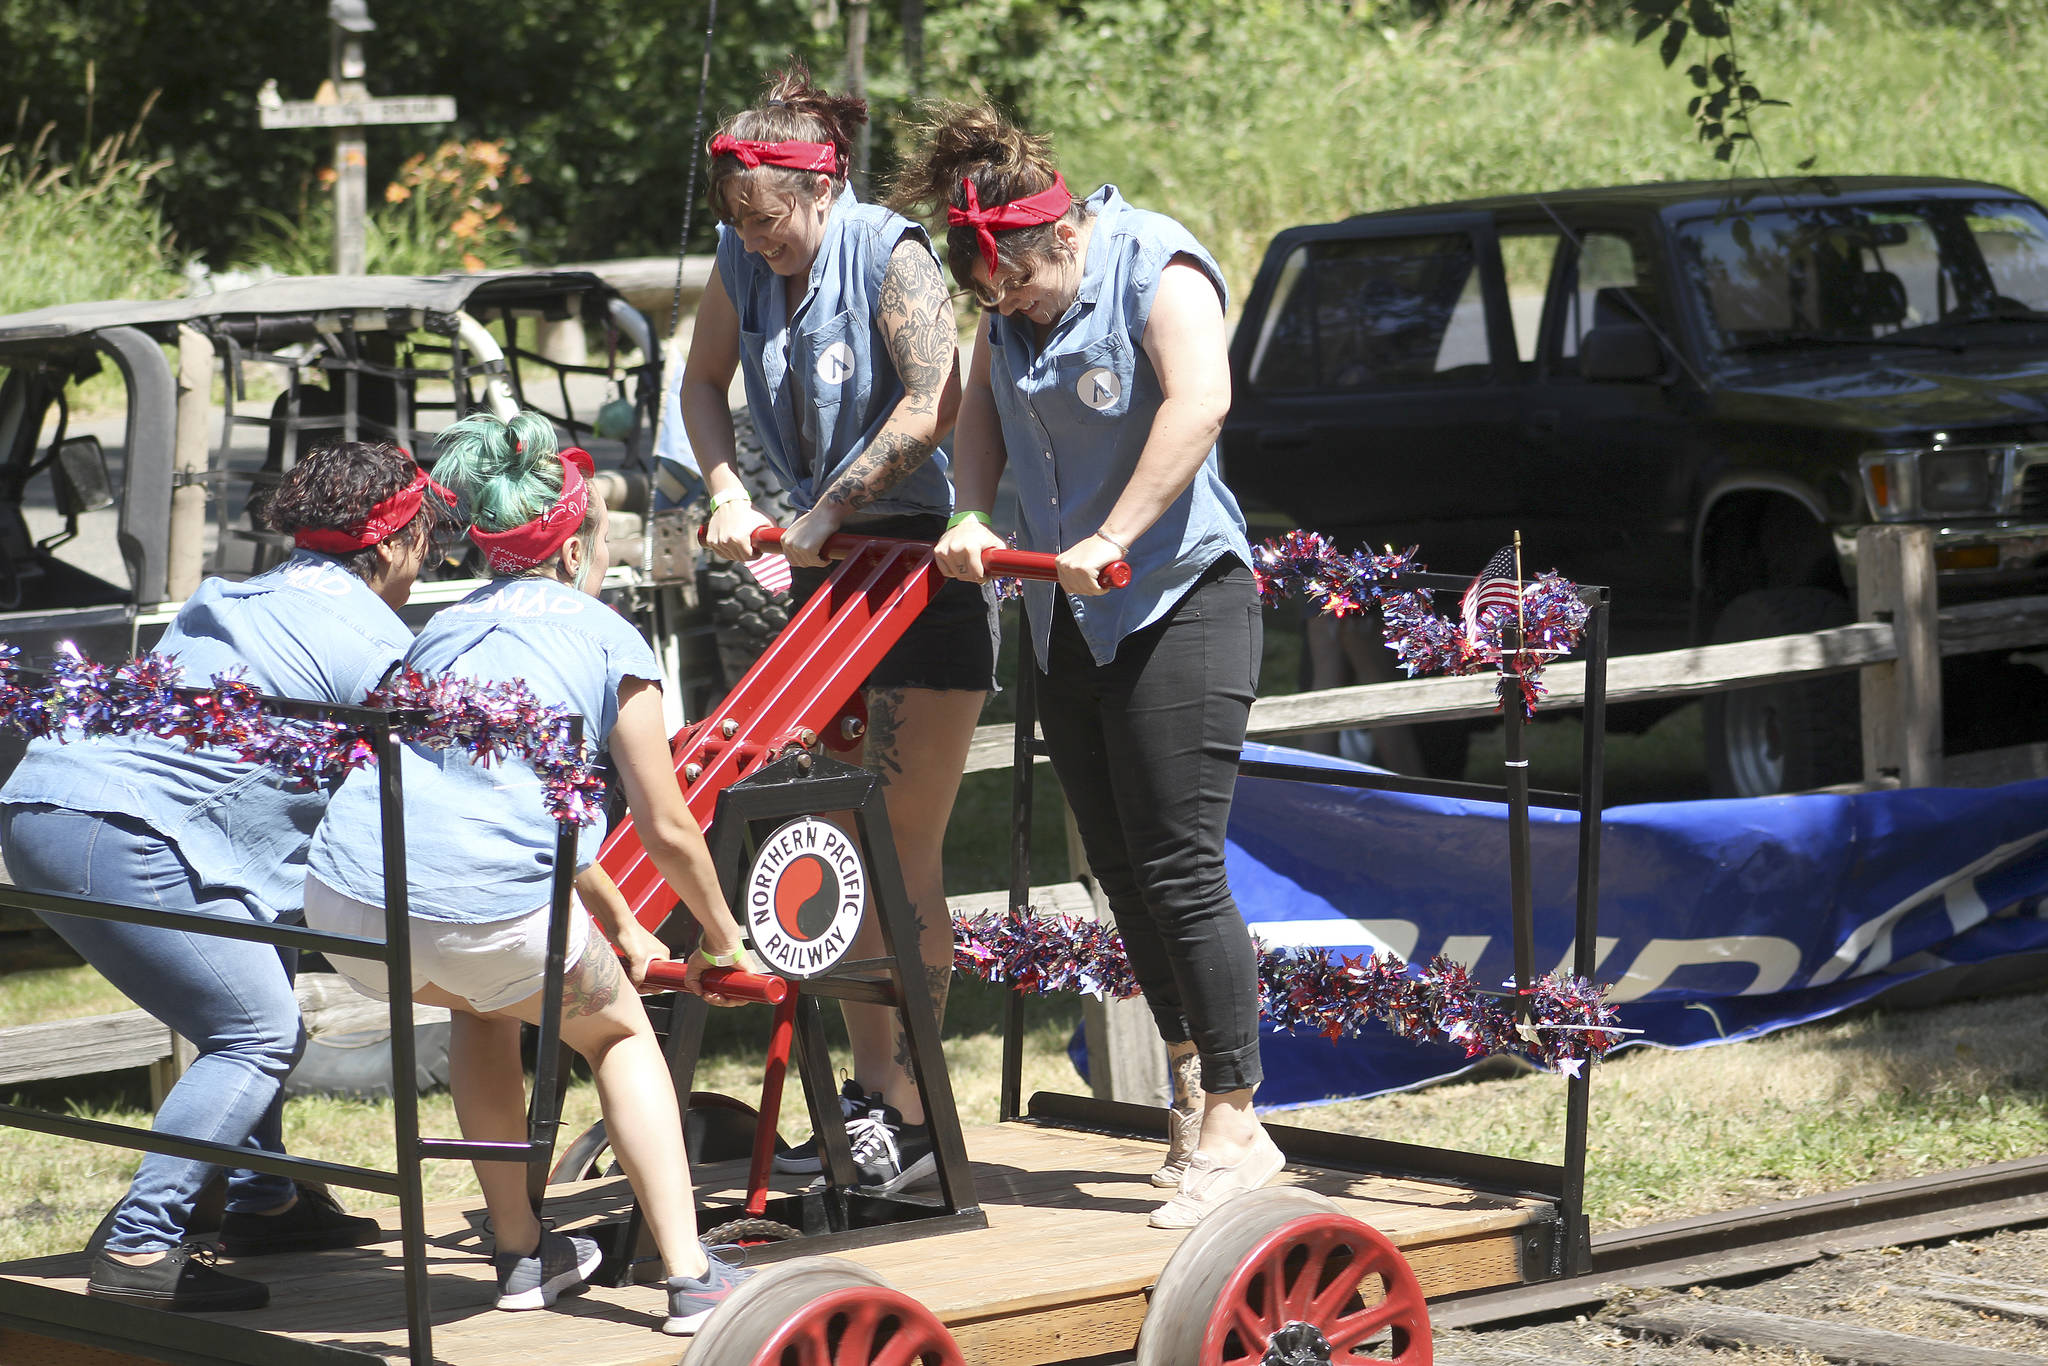 Photo by Ray Miller-Still 
Unless you’re extra burley, Wilkeson Handcar Races competitors often need a team of four people to race their handcar down the 400-foot-plus railroad track.